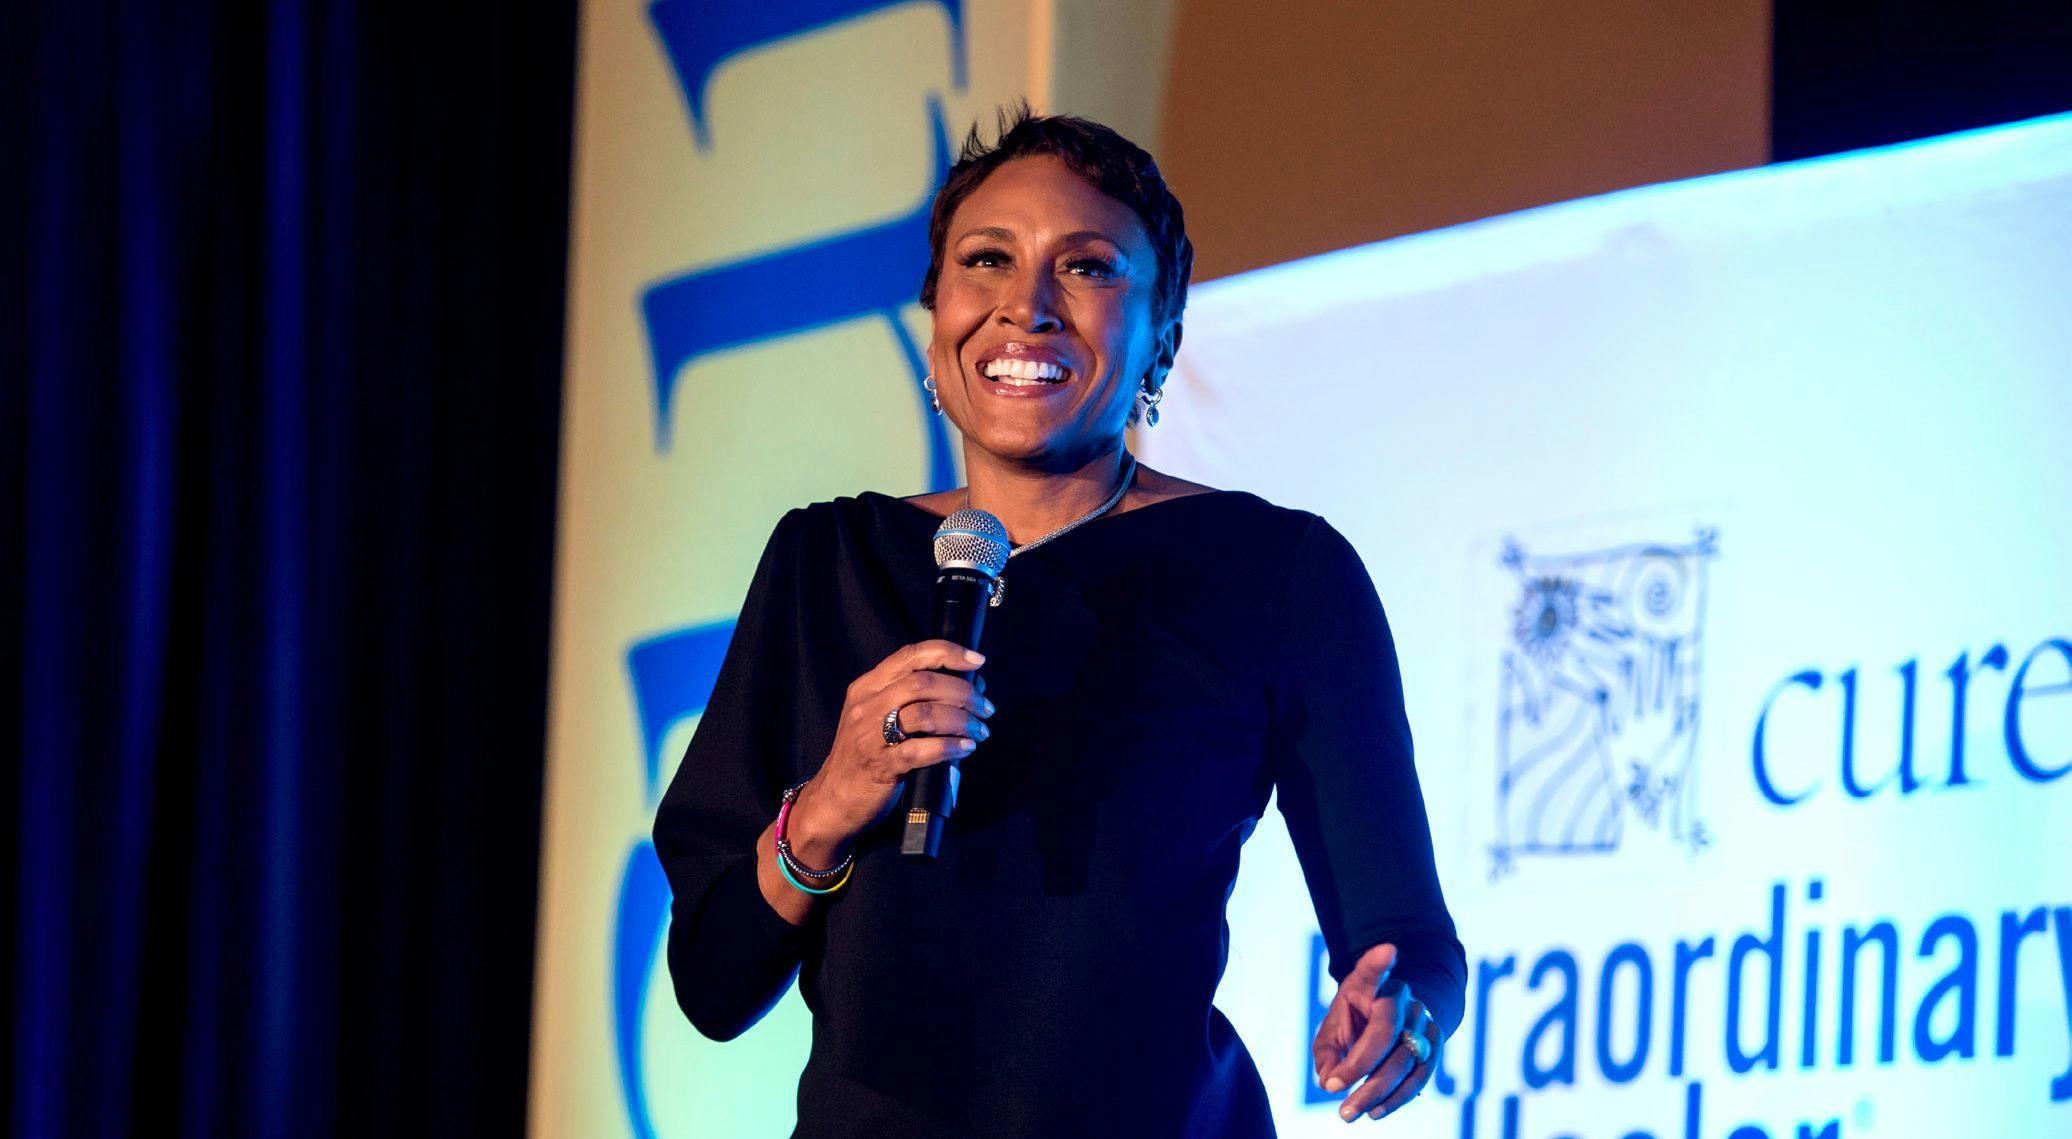 ROBIN ROBERTS speaks
to the crowd at the 2018
Extraordinary Healer event. - PHOTO BY RICH KESSLER